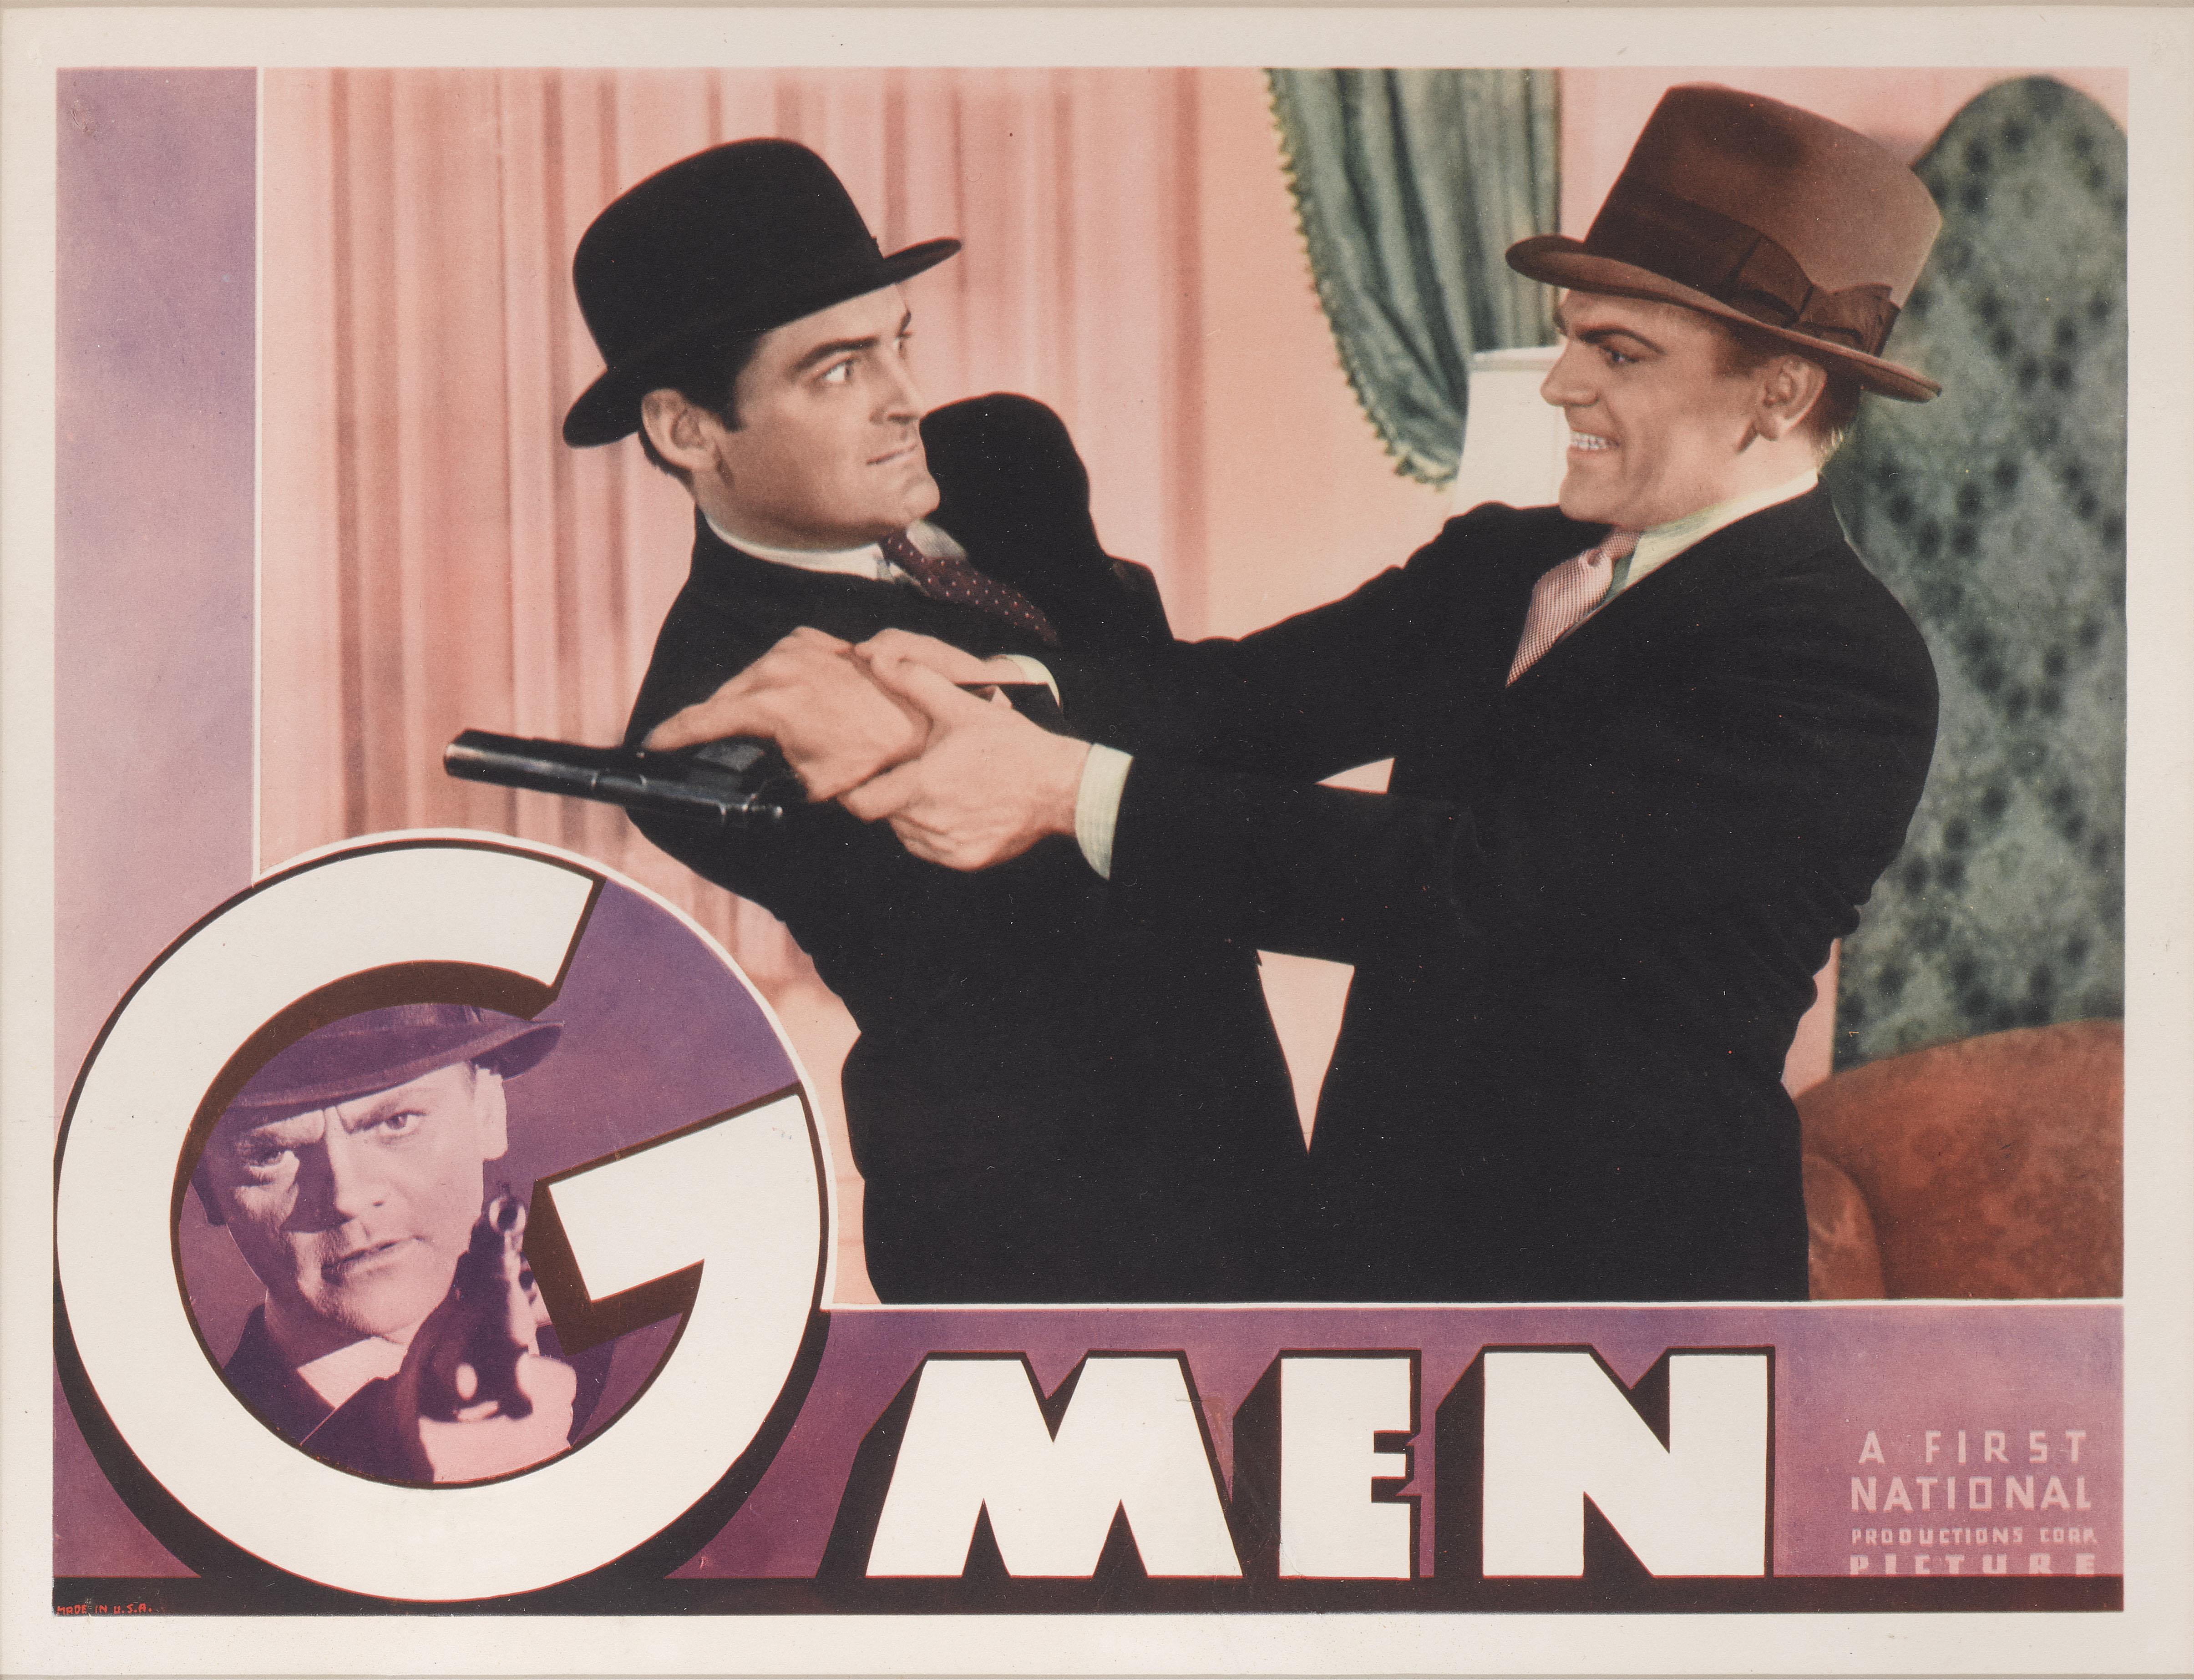 Original US lobby card for the 1935 Gangster film G-Men.
This film starred James Cagney, Margaret Lindsay and Ann Dvorak and was directed by William Keighley.
This lobby card is conservation framed with UV plexiglass in an Obeche wood frame with